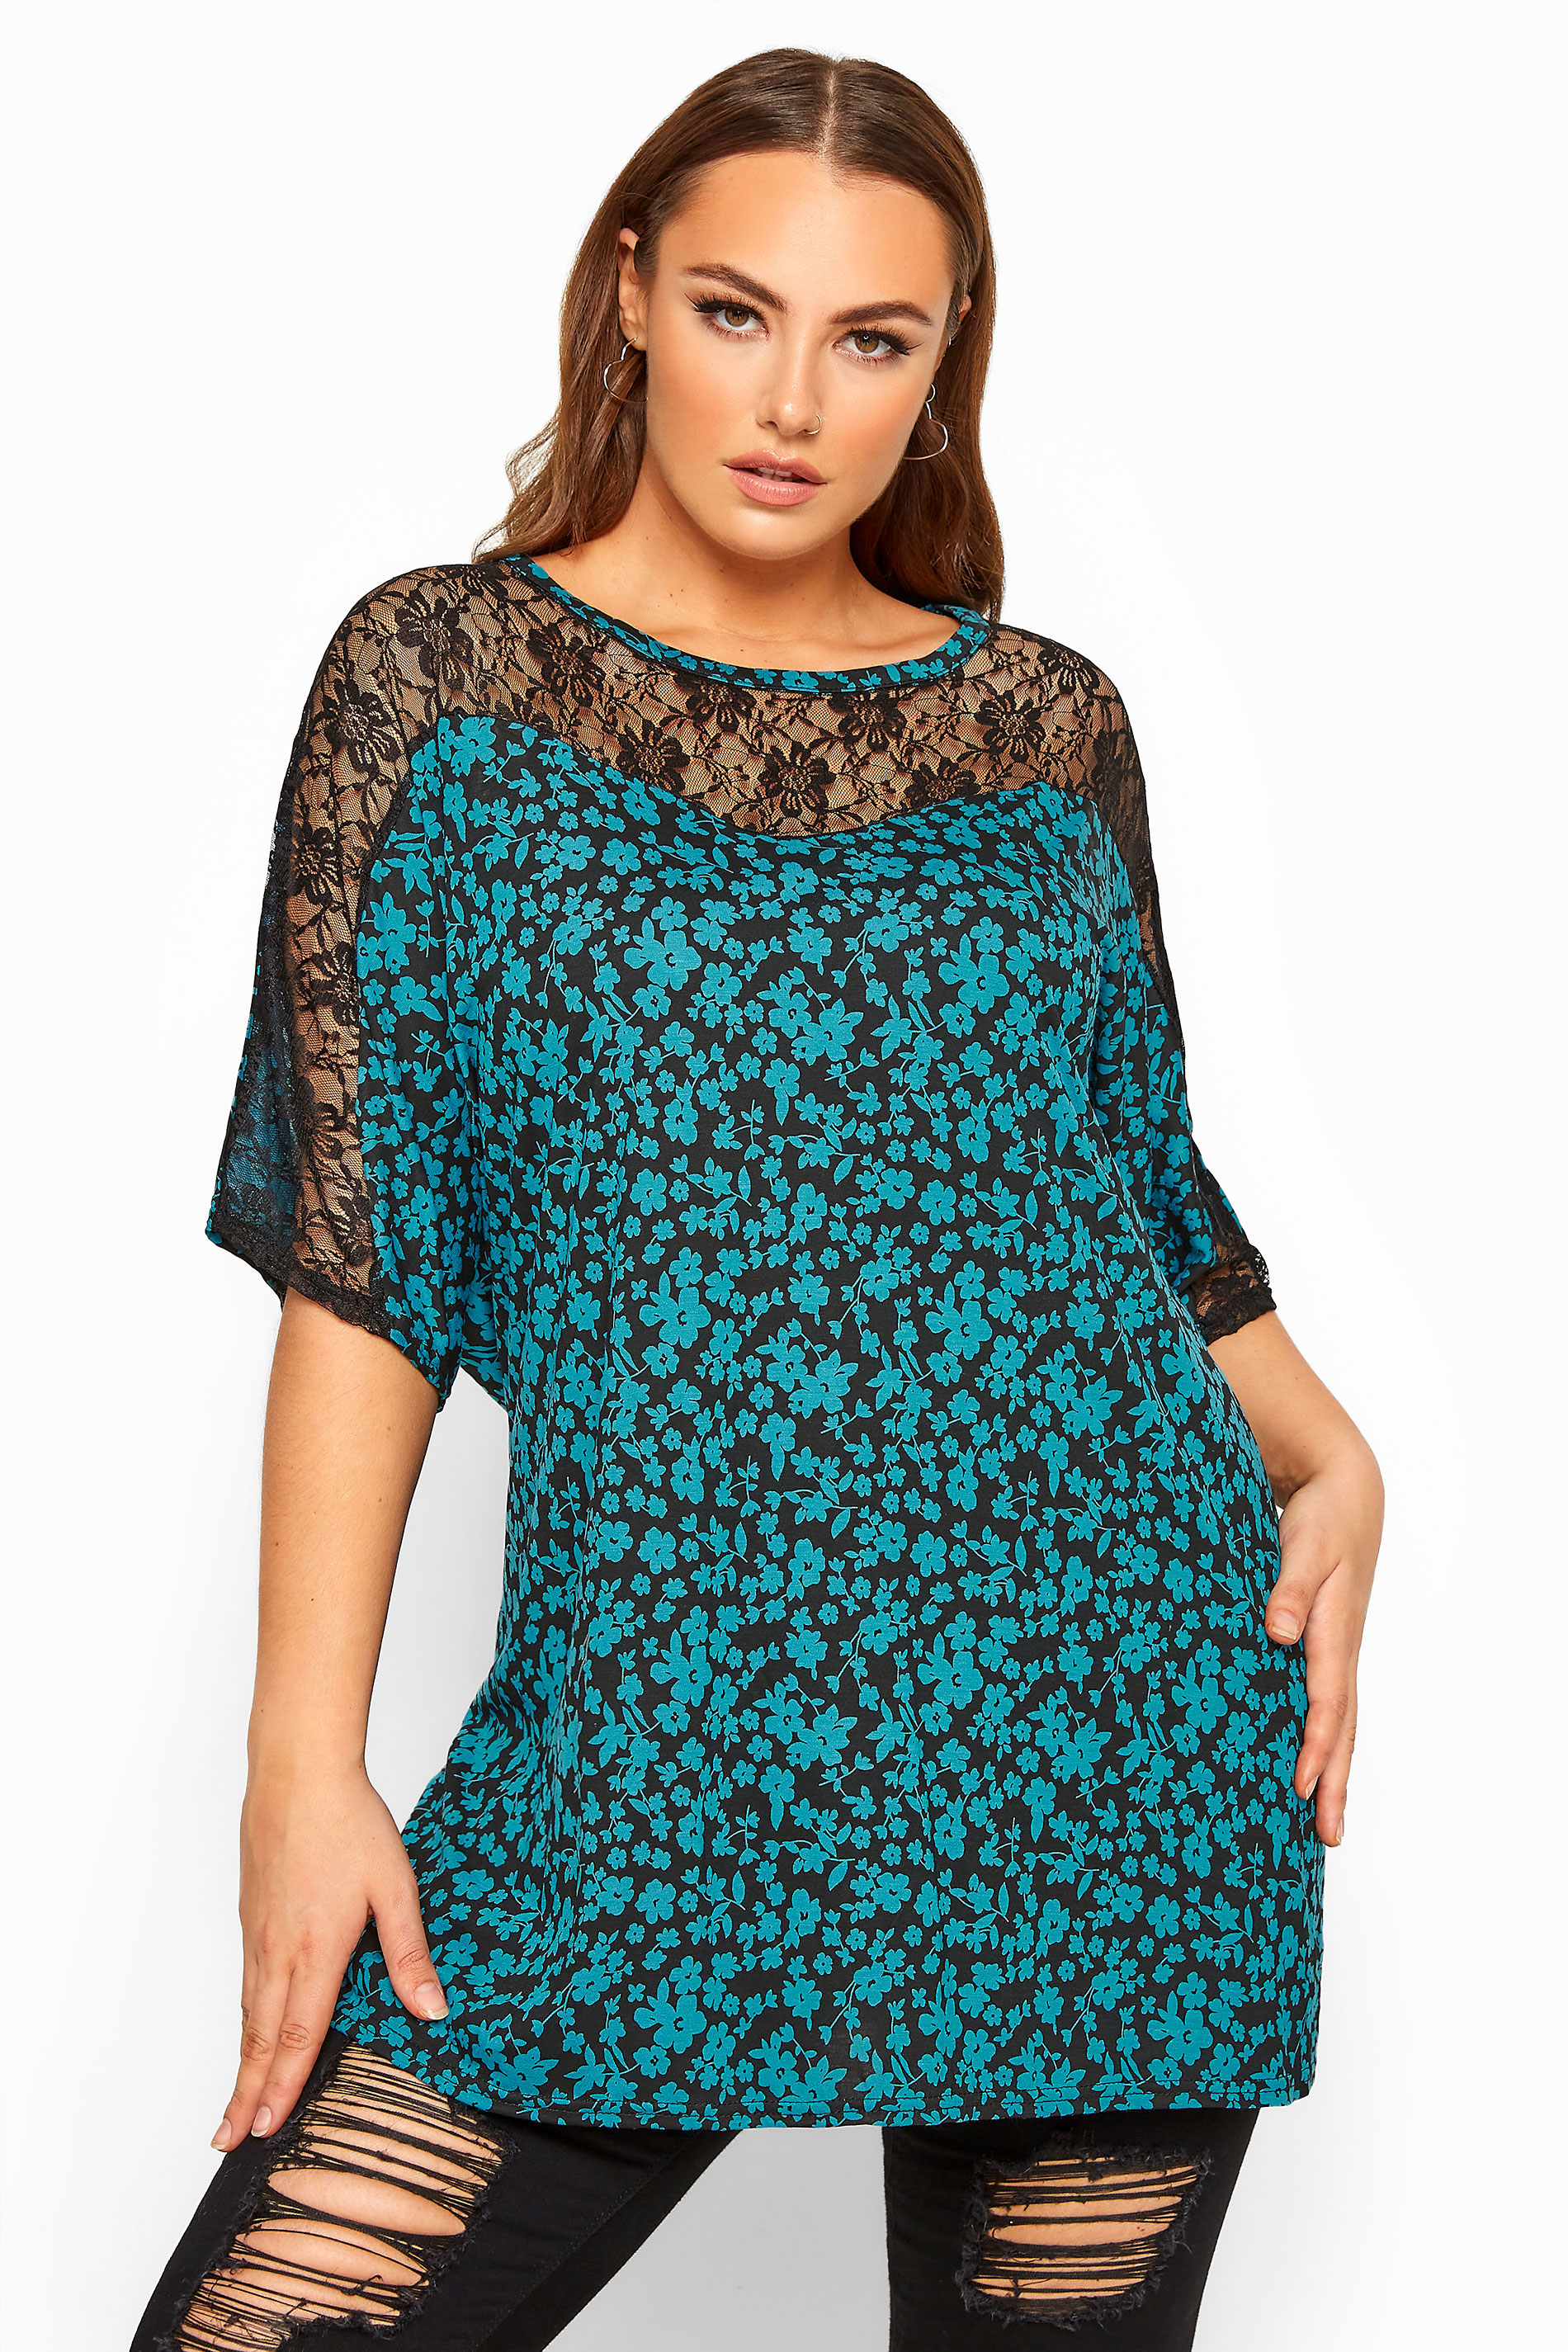 LIMITED COLLECTION Teal Blue Floral Lace Insert Top | Yours Clothing